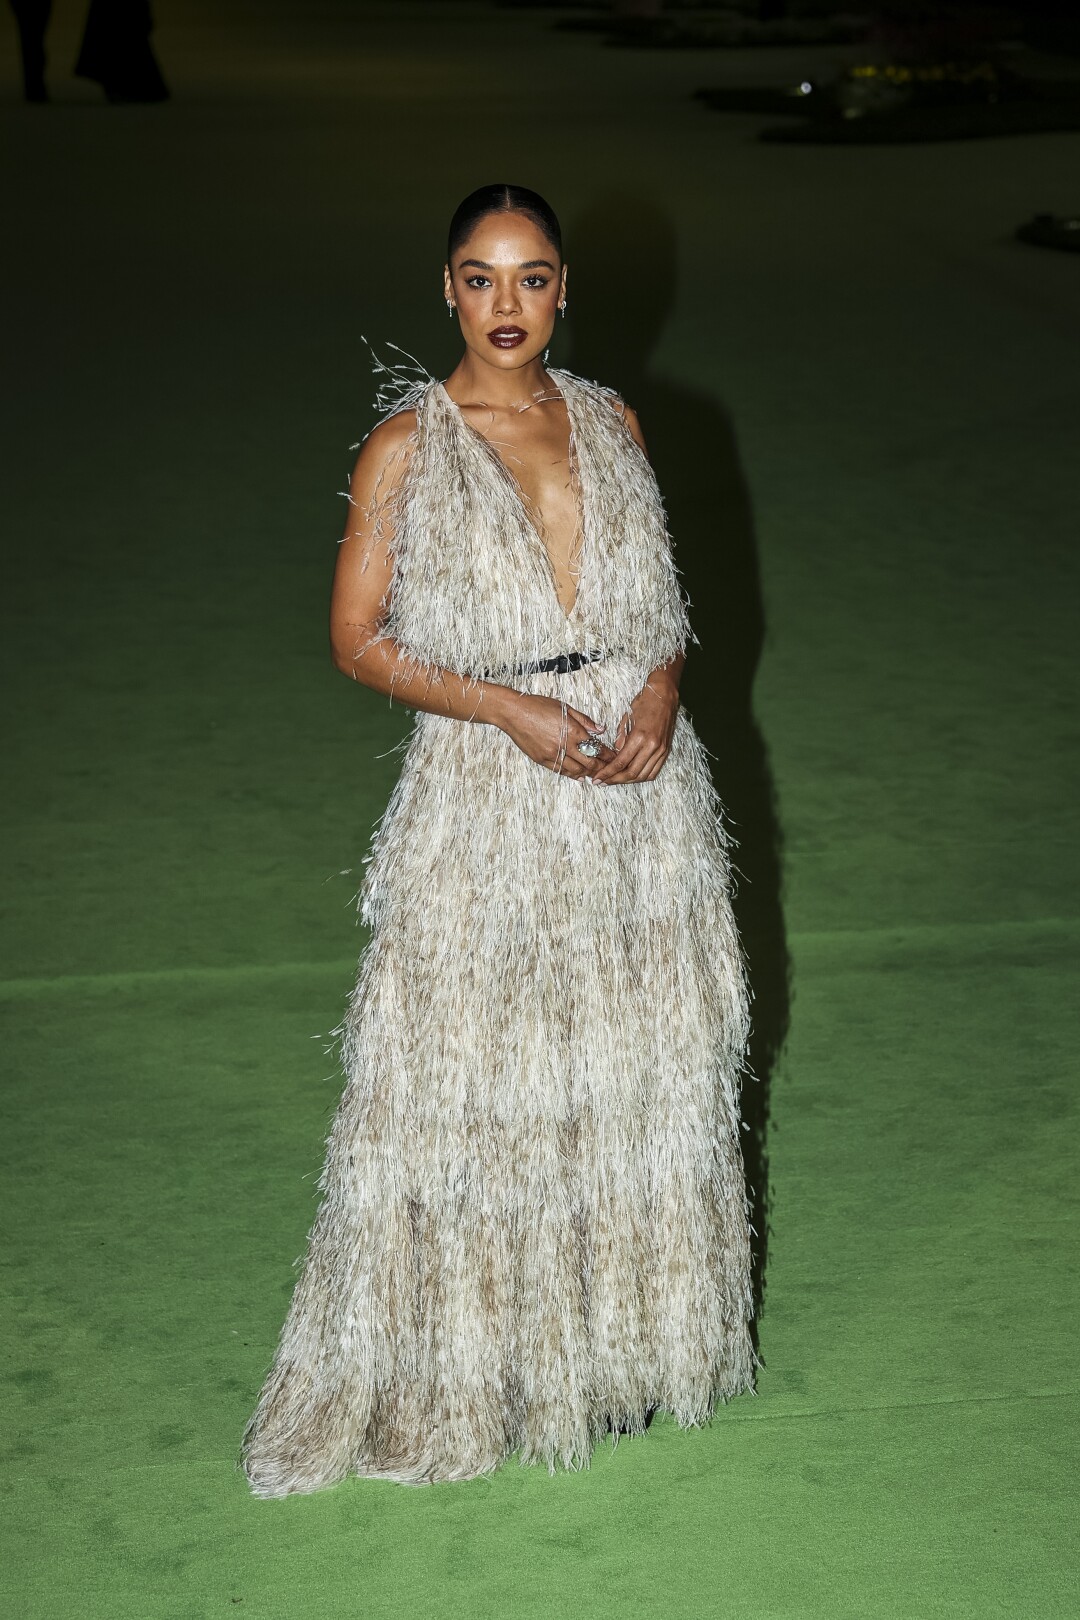 A woman in a feathery white dress posing on a green carpet